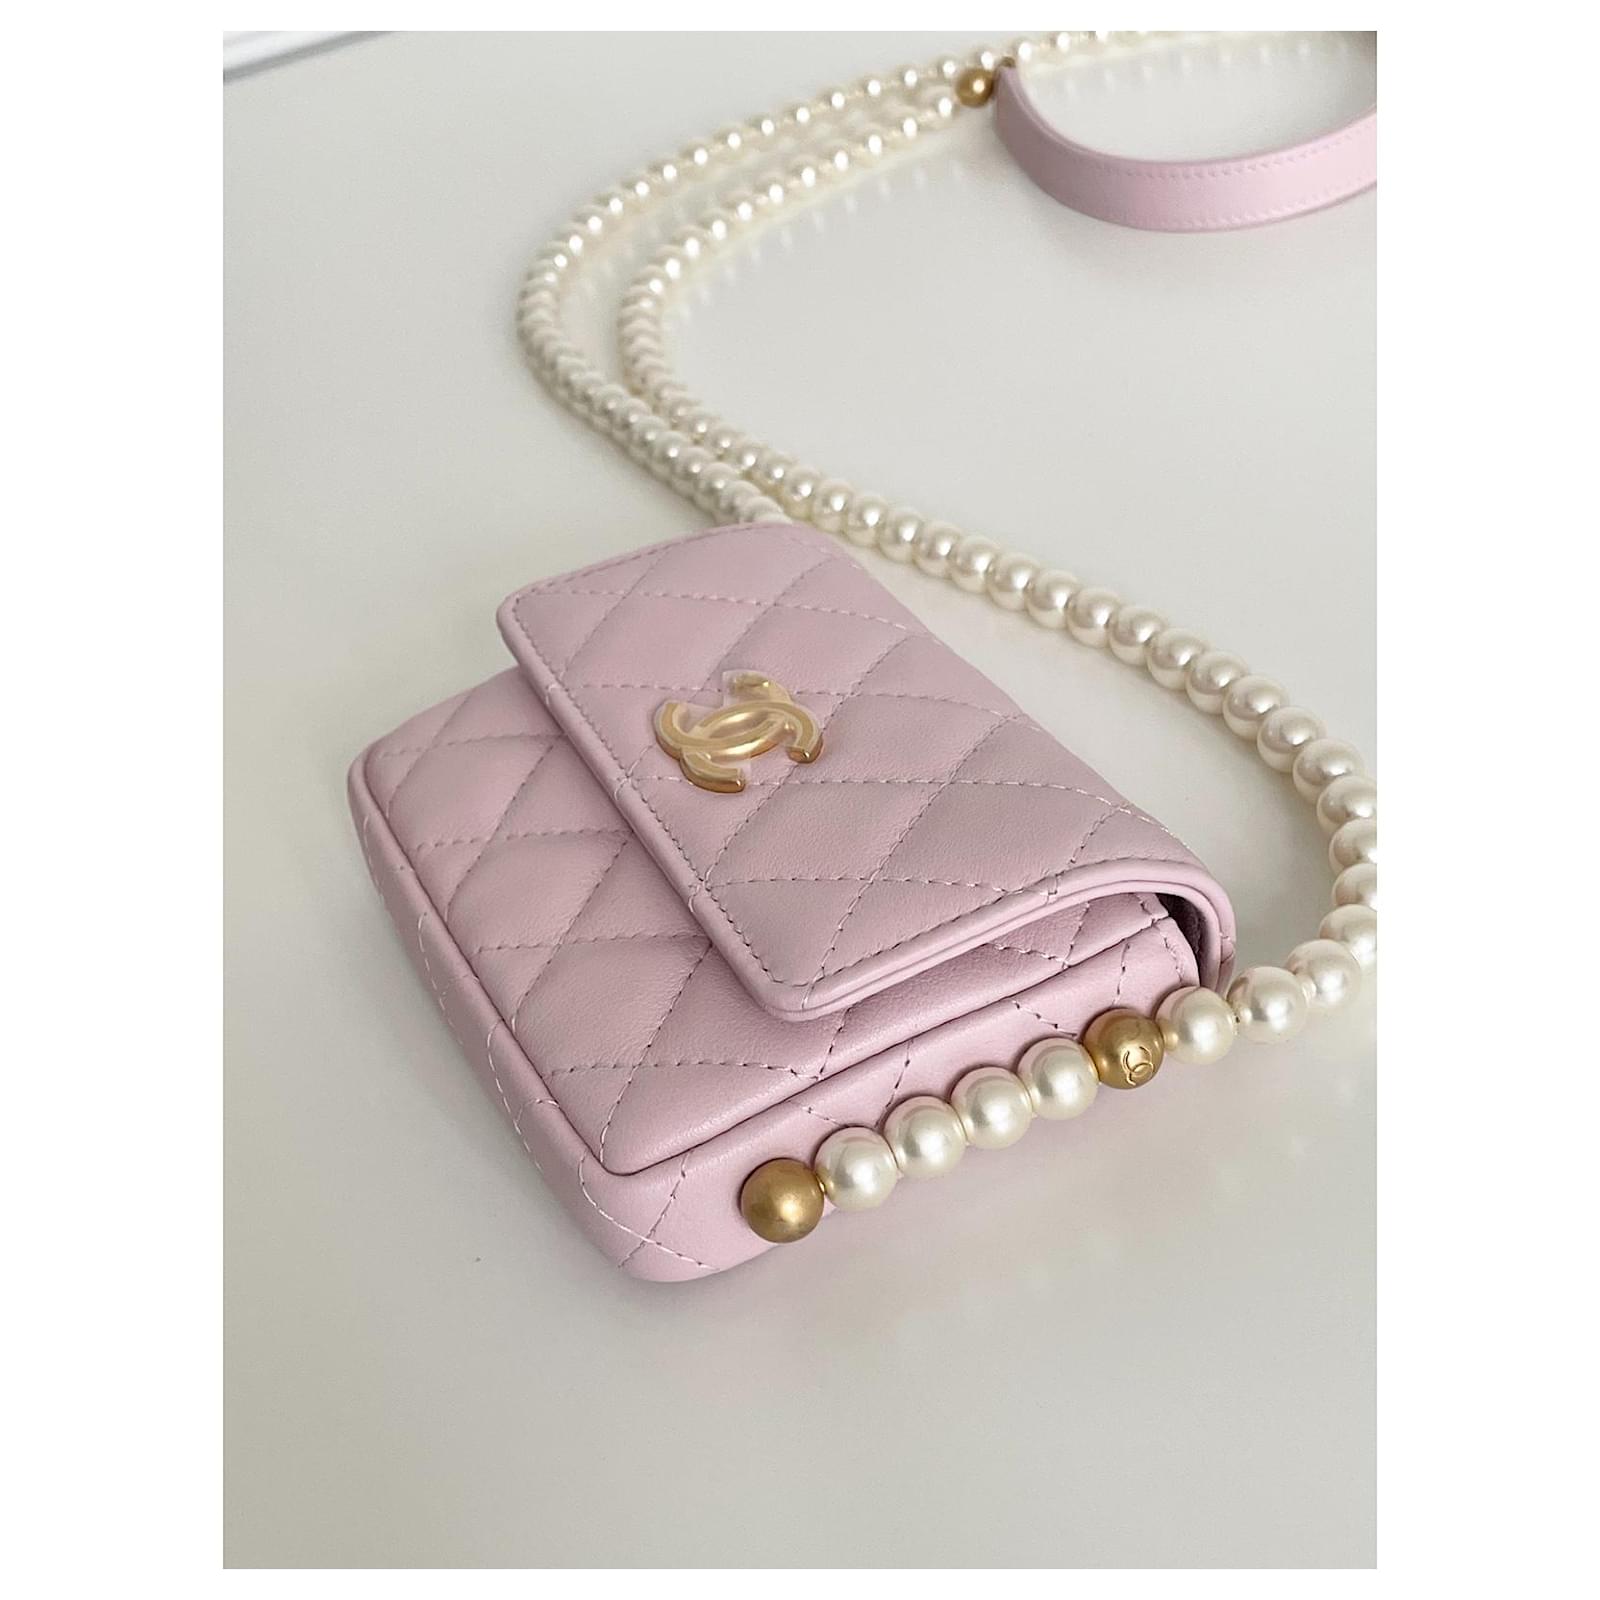 AUTH BNIB CHANEL Woc Light Pink Rose Clair Wallet On A Chain Bag Clutch New  21C $3,750.00 - PicClick